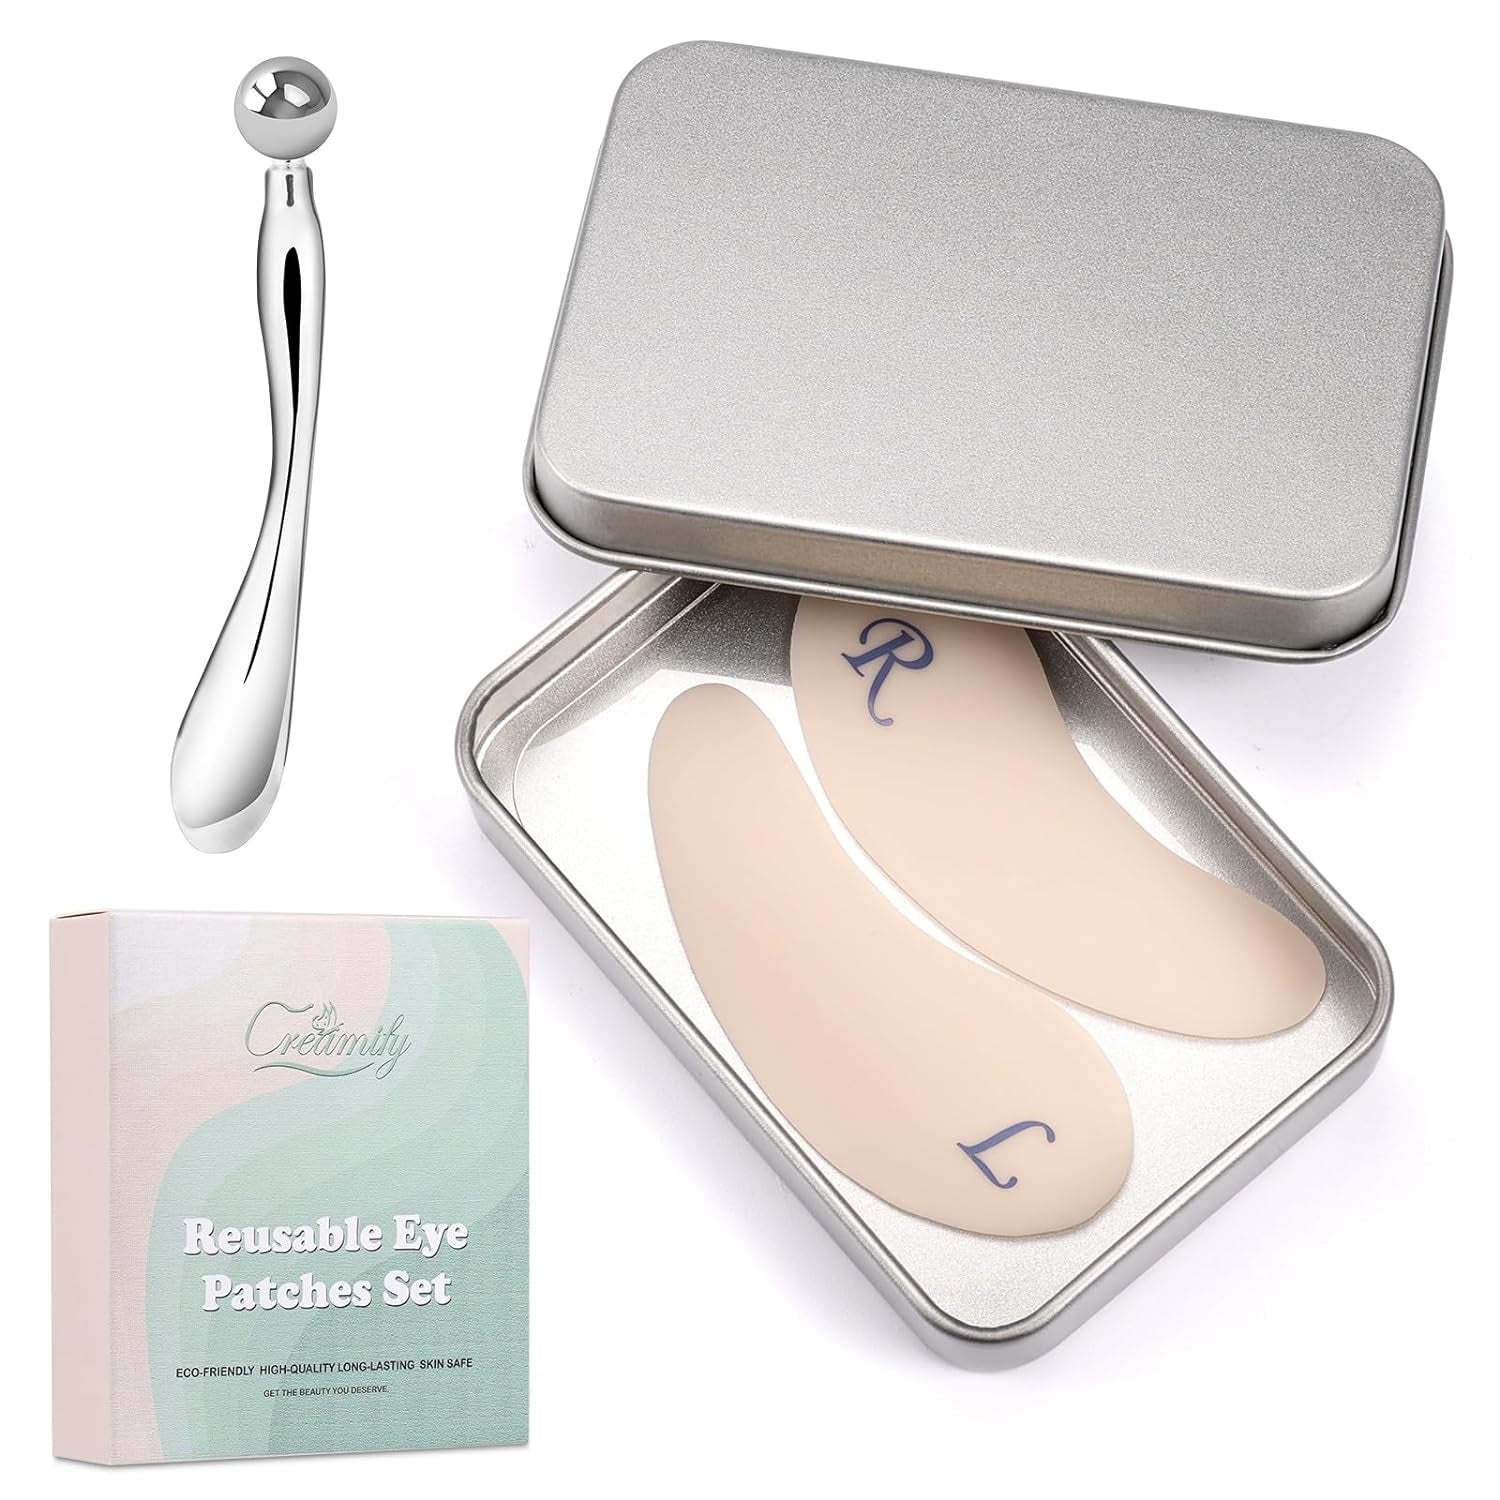 Reusable Eye Patches, Silicone under Eye Patches with Lifting Effect to Reduce Wrinkles and Fine Lines, Pair with Metal Eye Cream Applicator,Tin Case